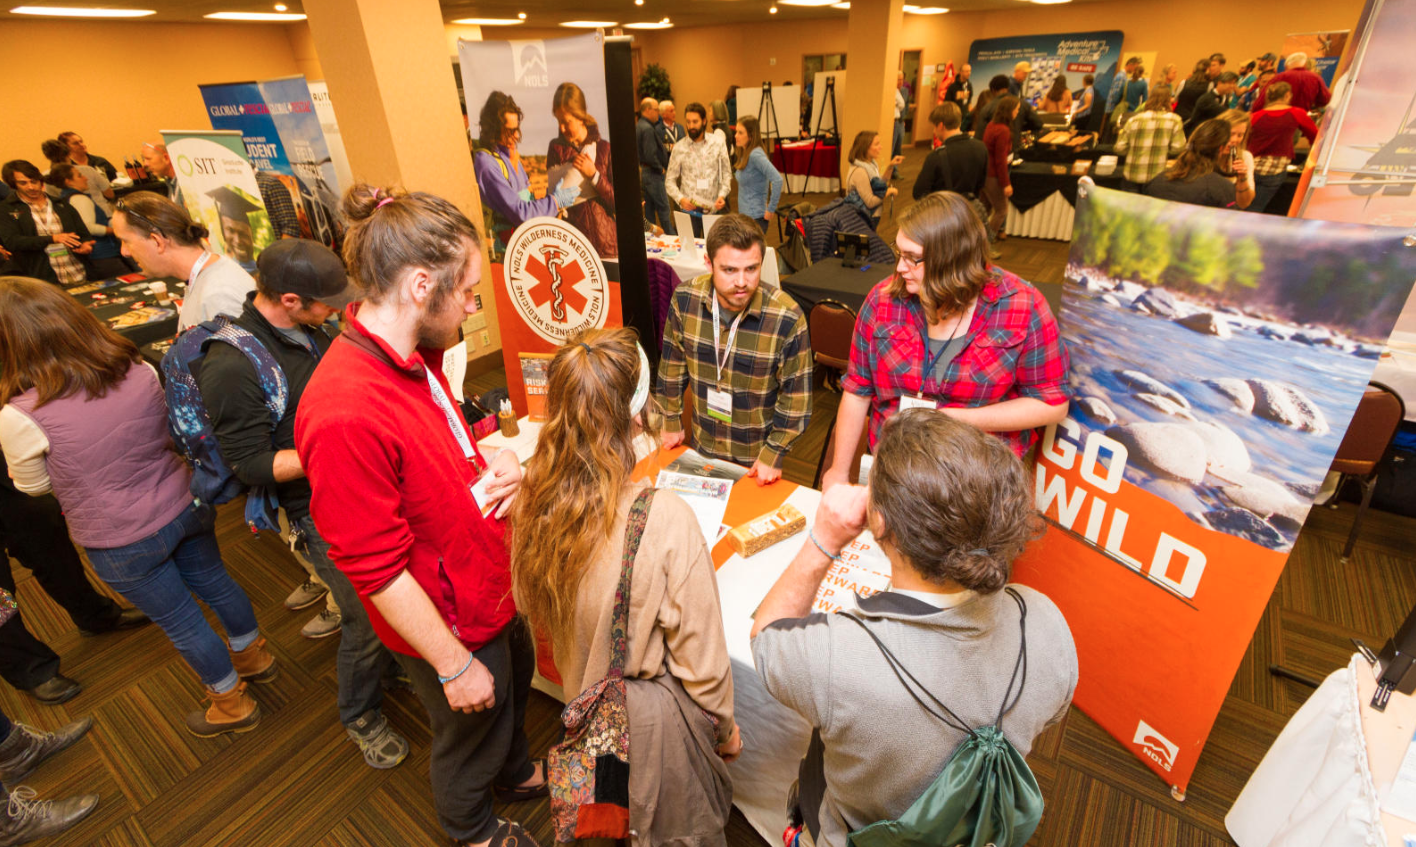 Attendees at 2017 WRMC NOLS exhibitor booth